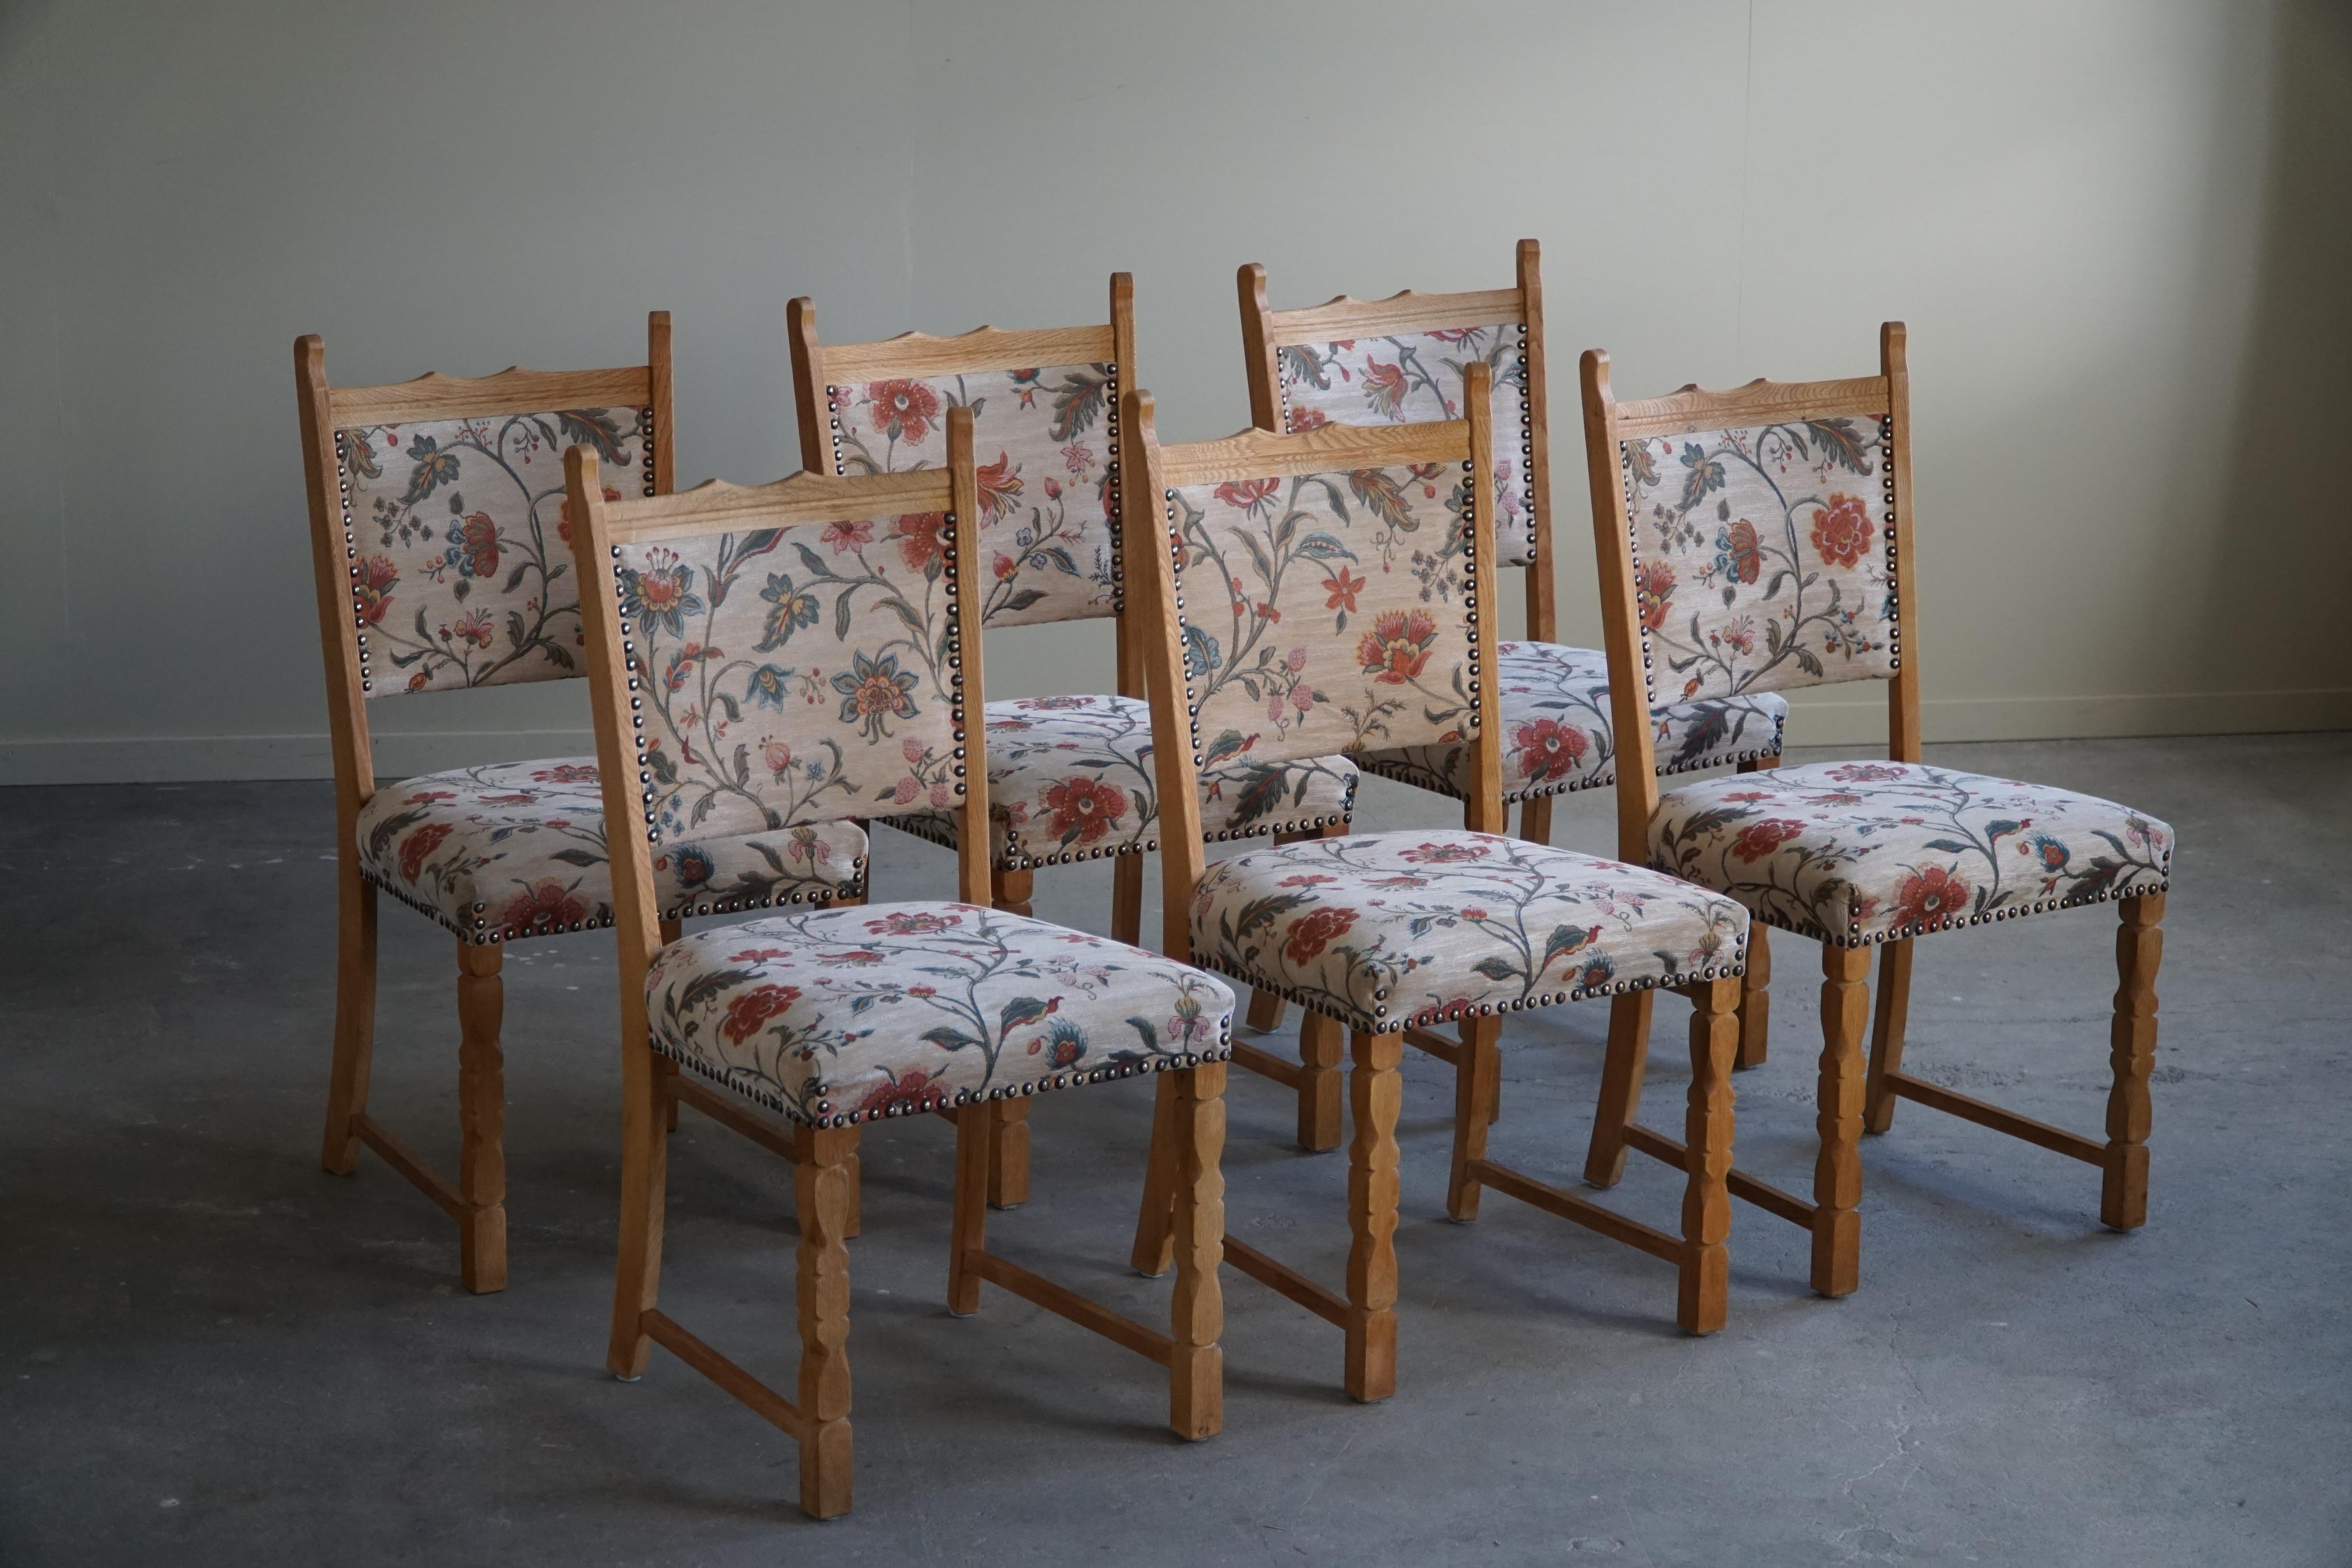 Mid-Century Modern A Set of 6 Dining Room Chairs in Oak & Fabric by a Danish Cabinetmaker, 1950s For Sale